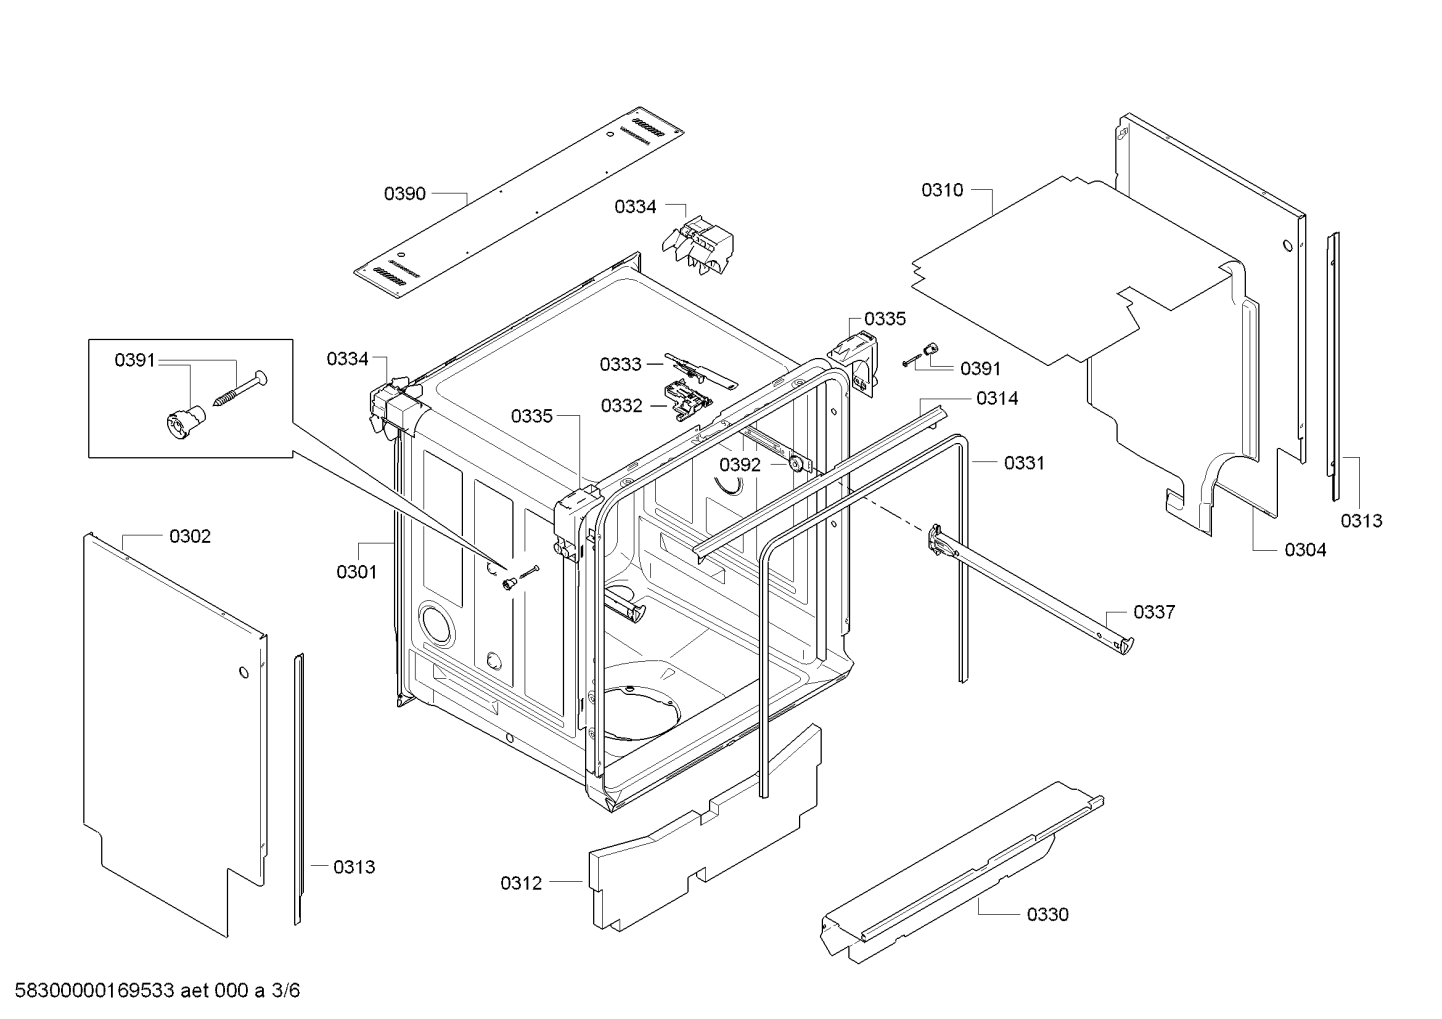 drawing_link_3_device_1646720